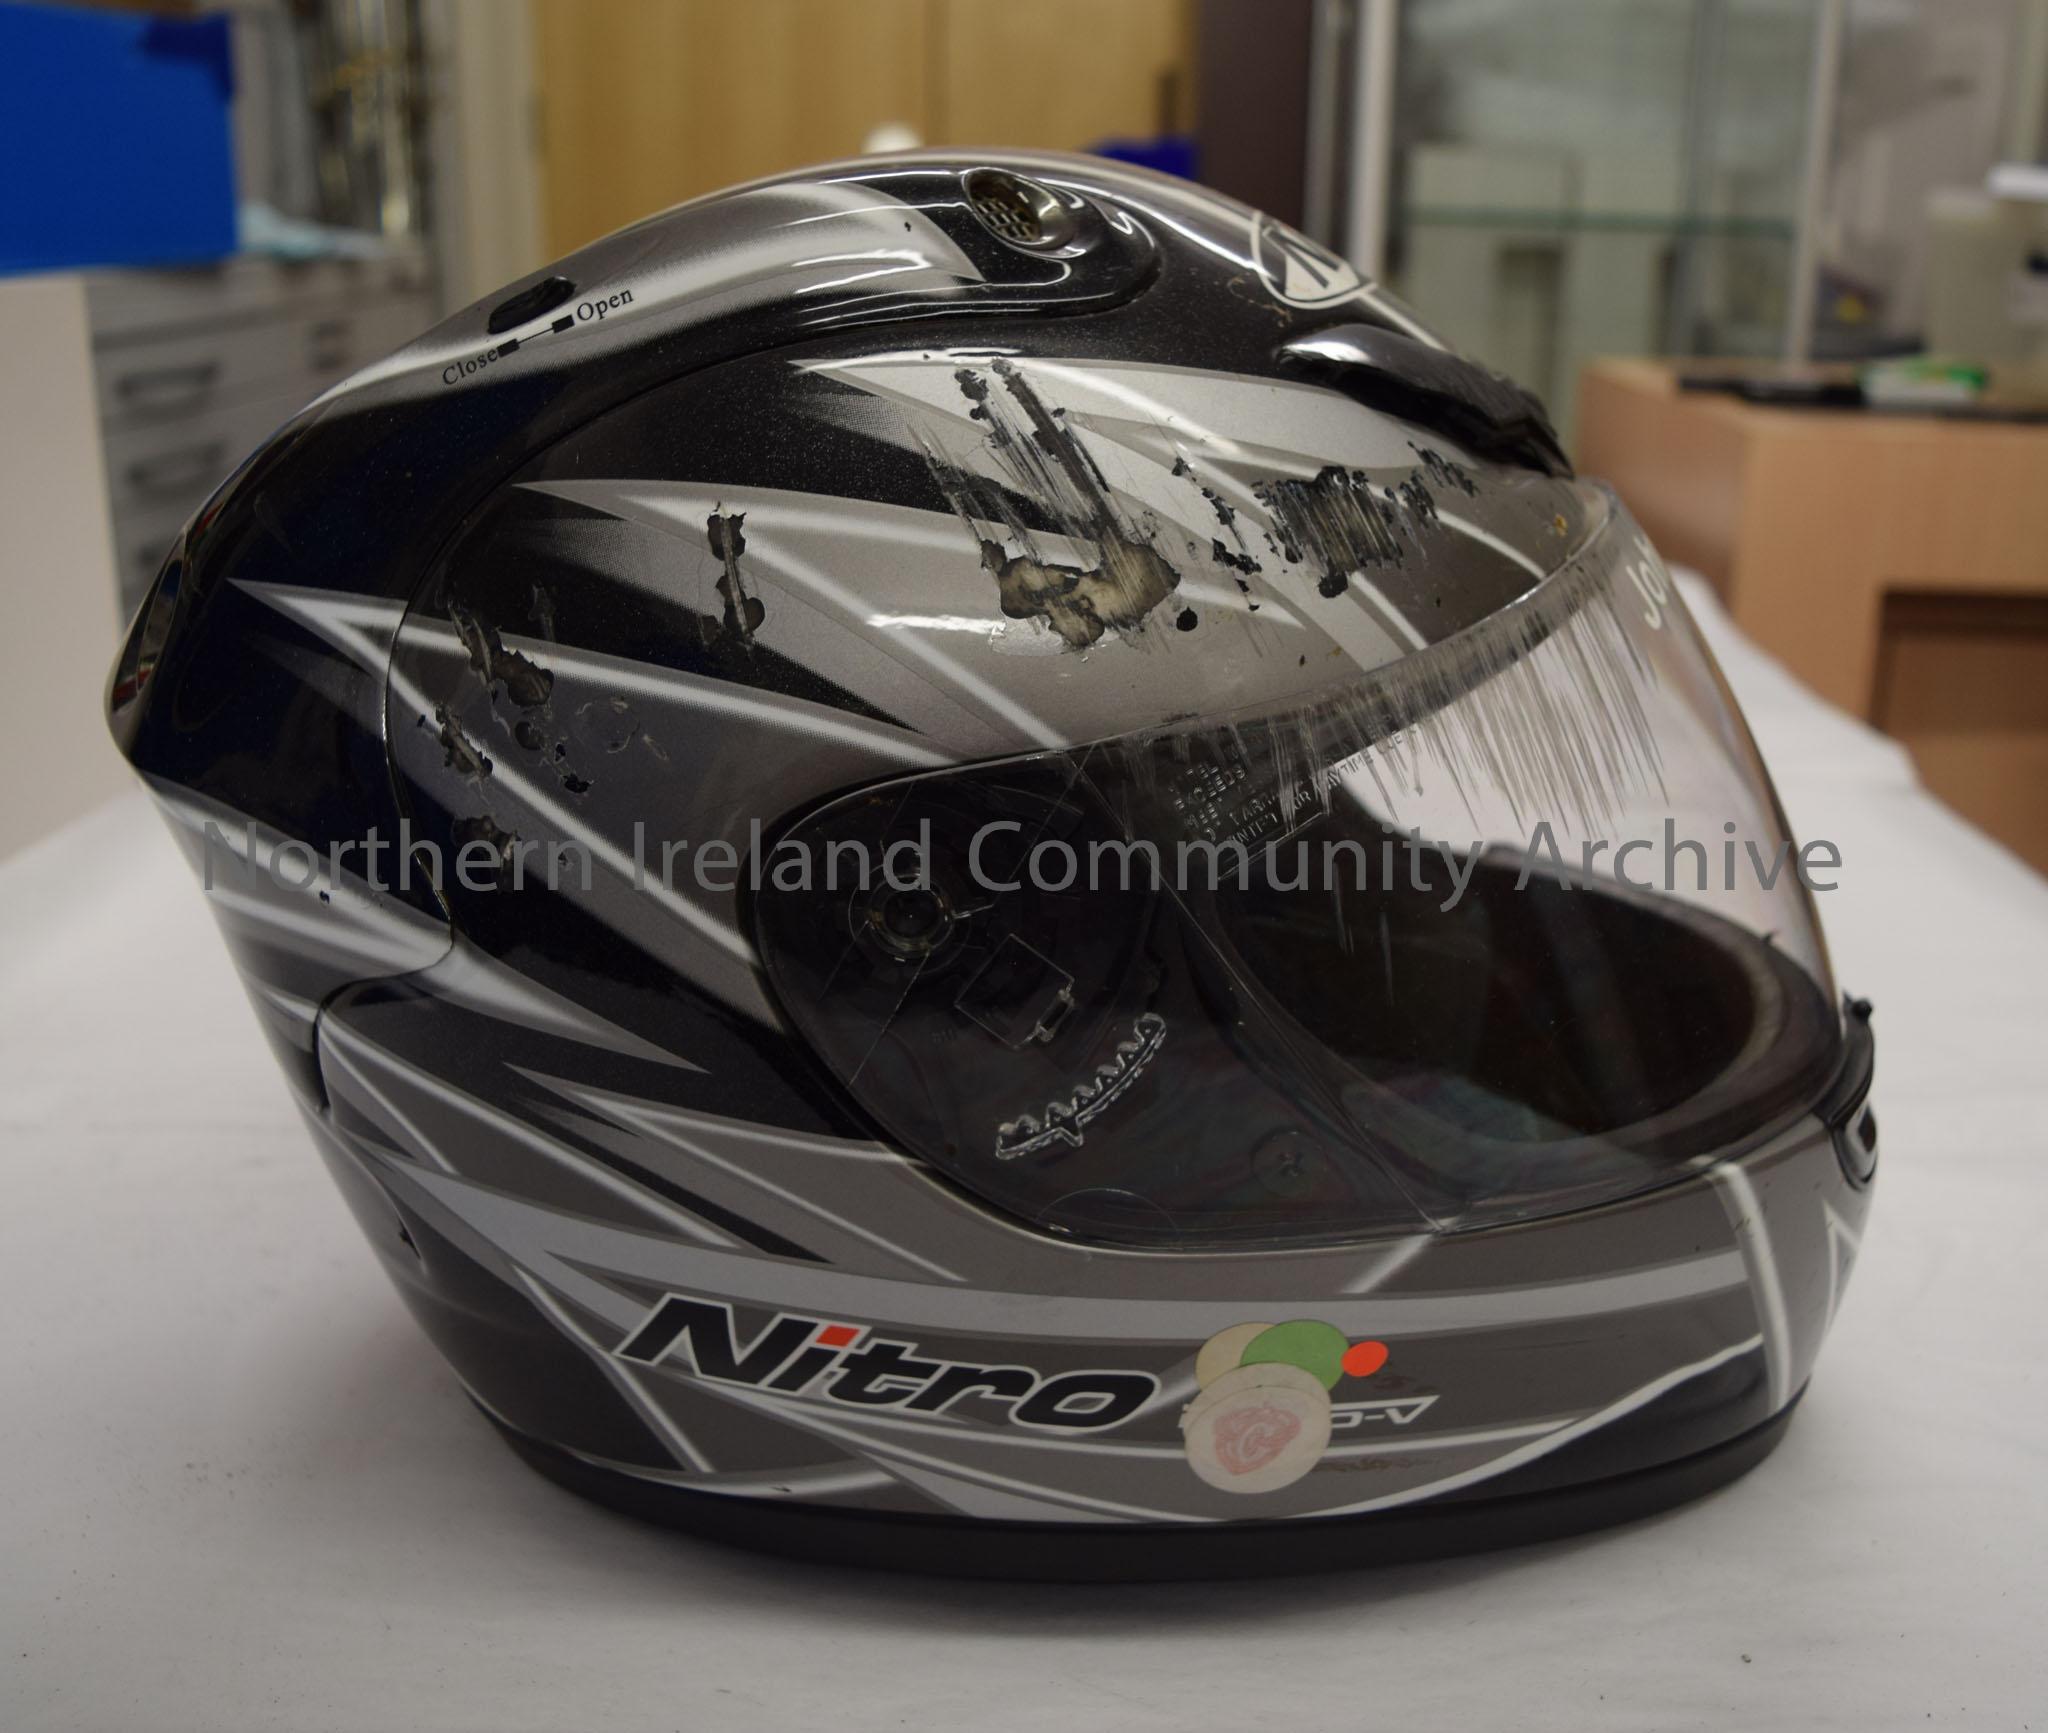 Nitro Racing motorcycle helmet belonging to Johnny Quinn. Shimmering black with grey and white “spiked” pattern. – 2016.69 (5)